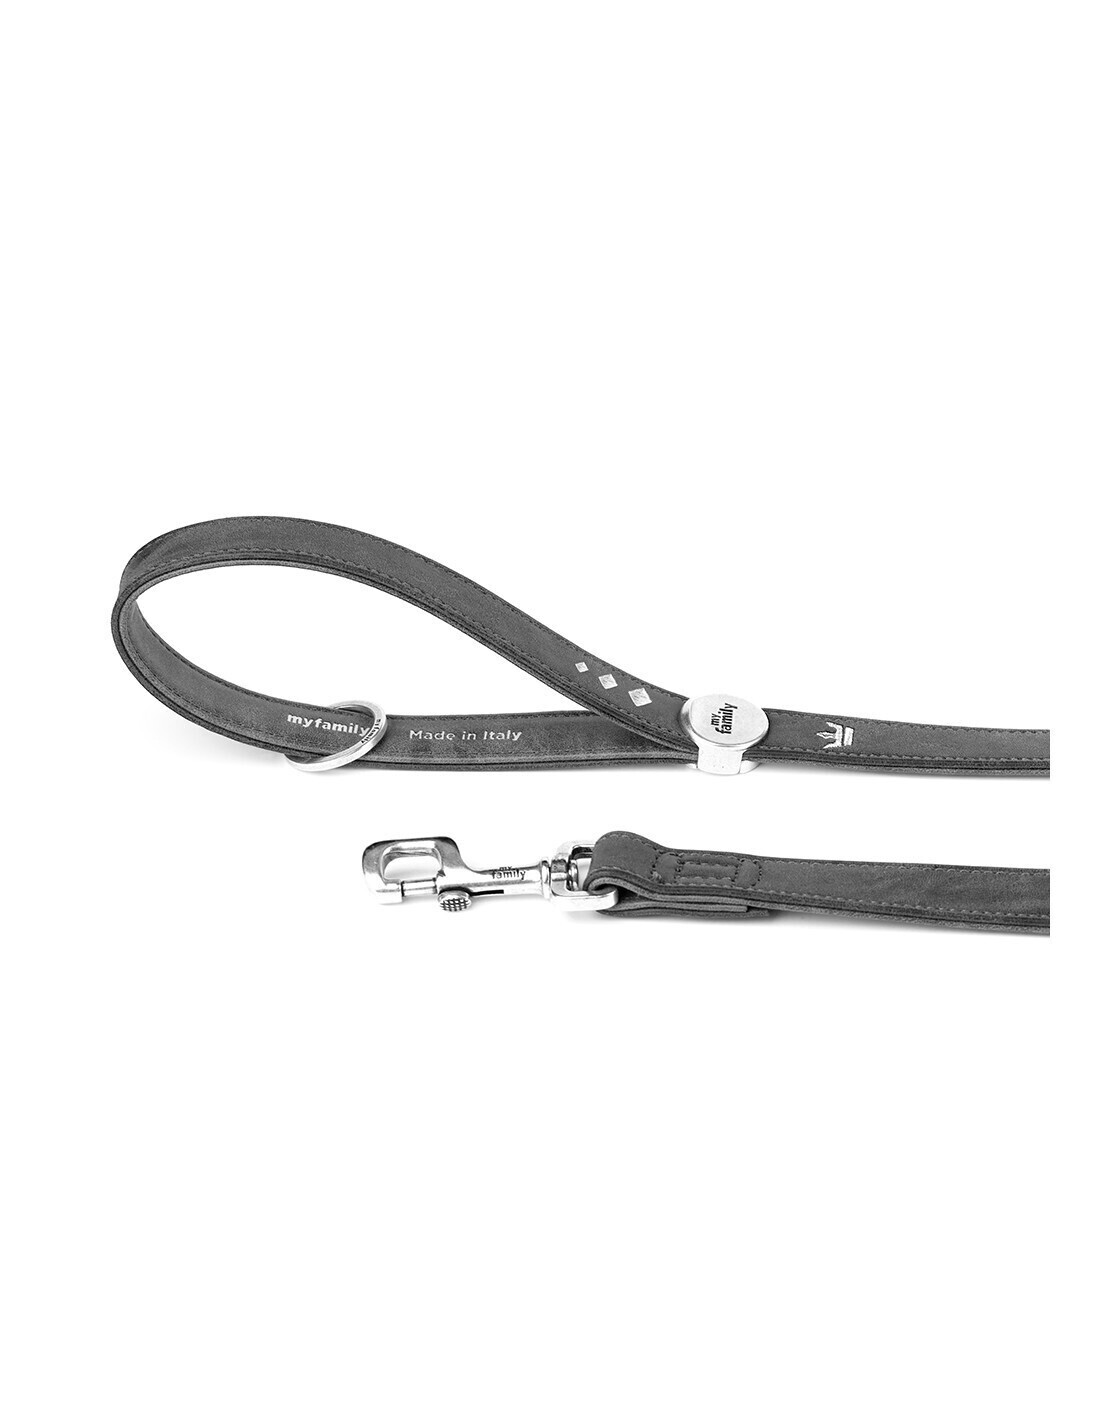 Royal Dog Leash in Fine Crafted Grey Leatherette